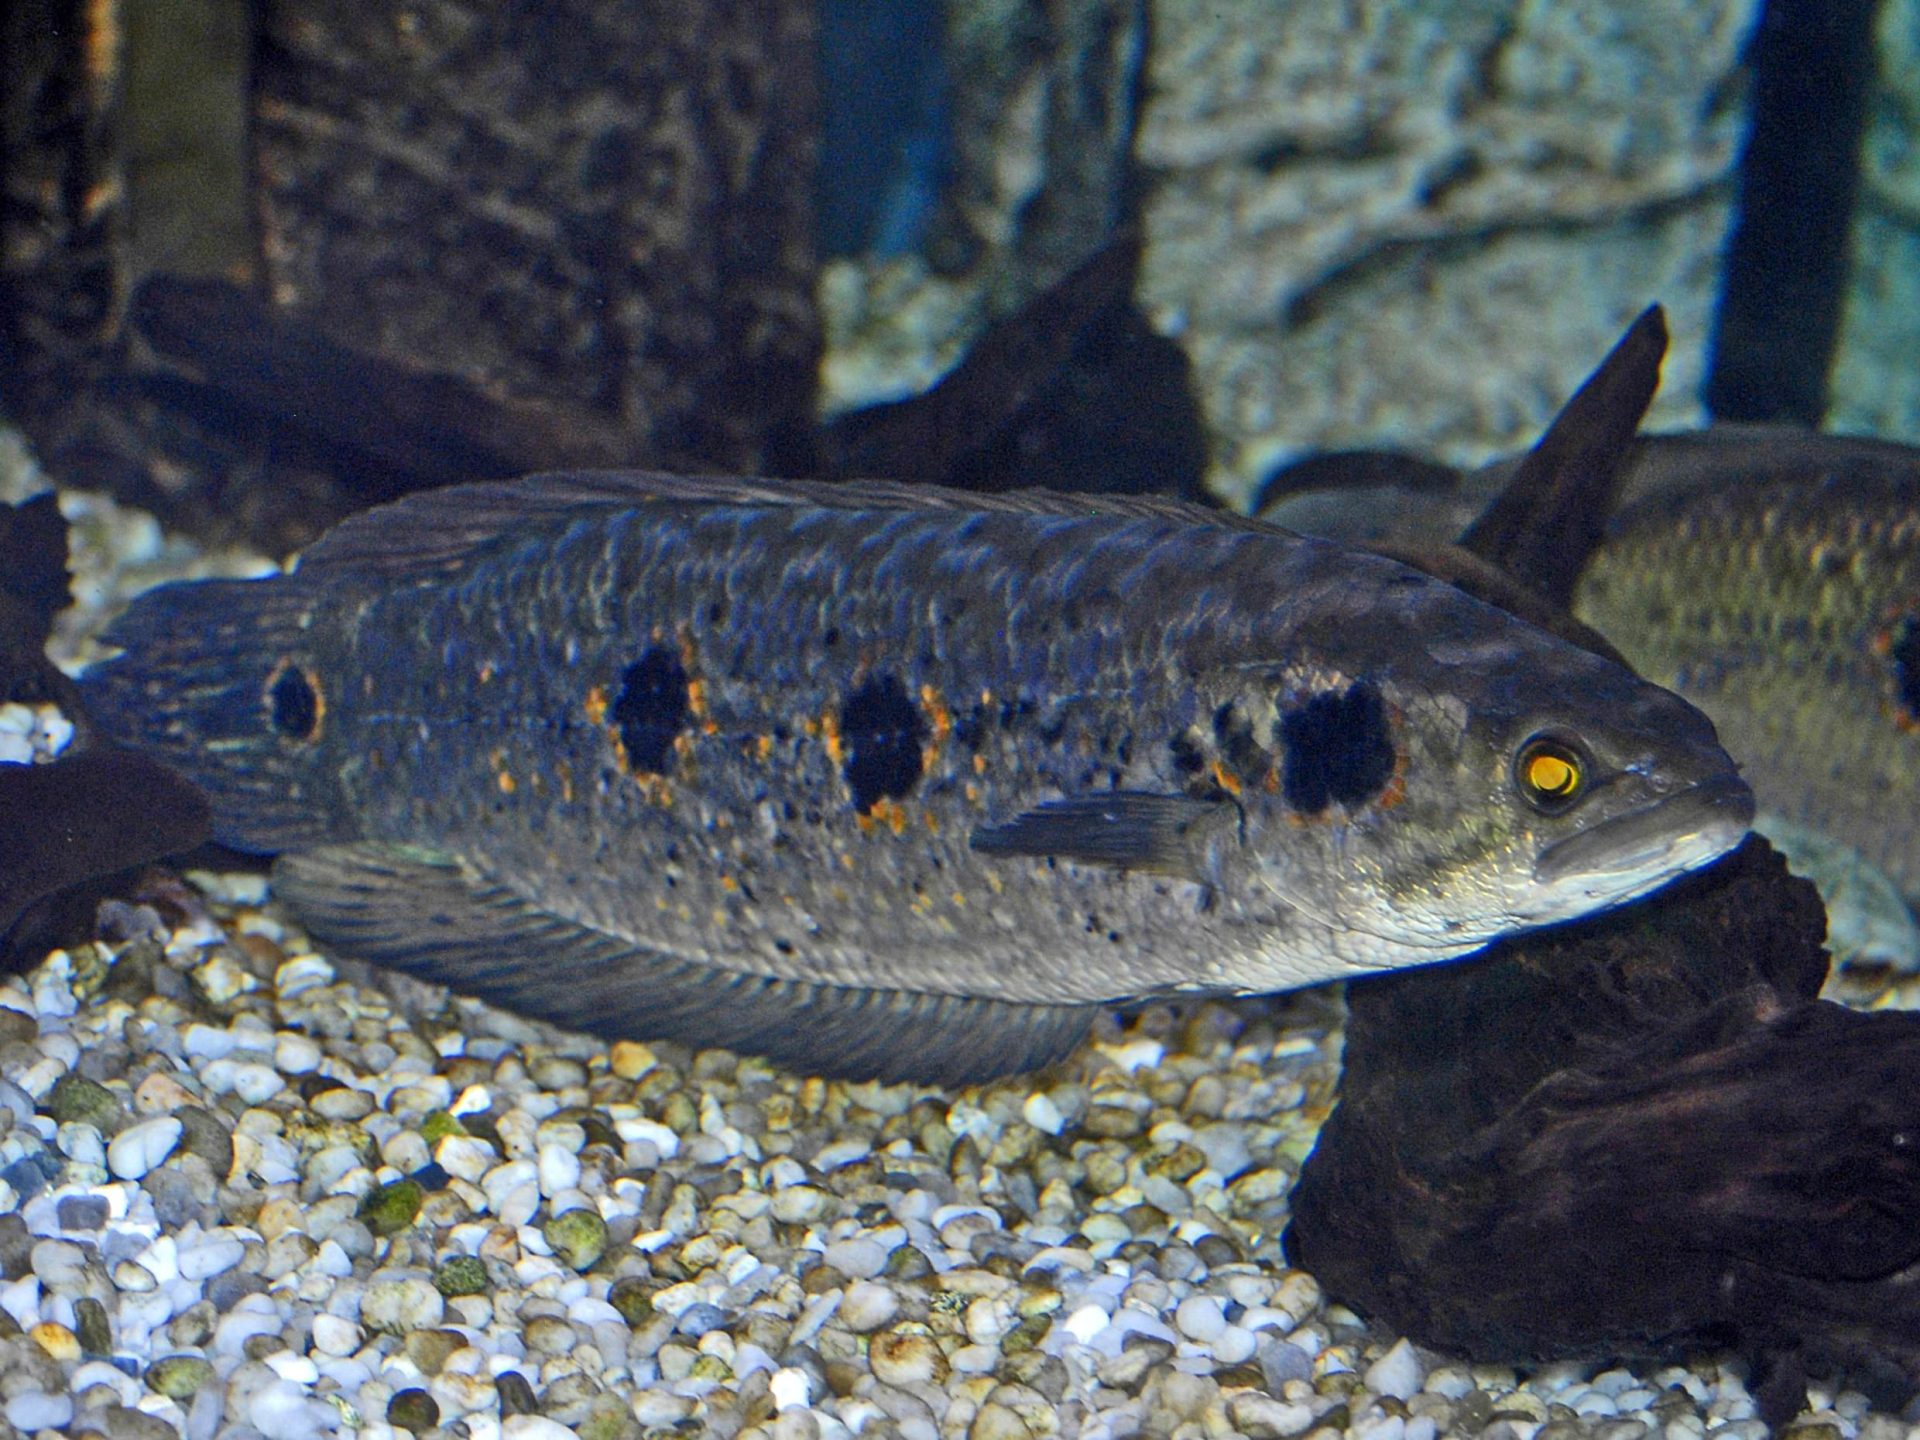 Ocellated snakehead